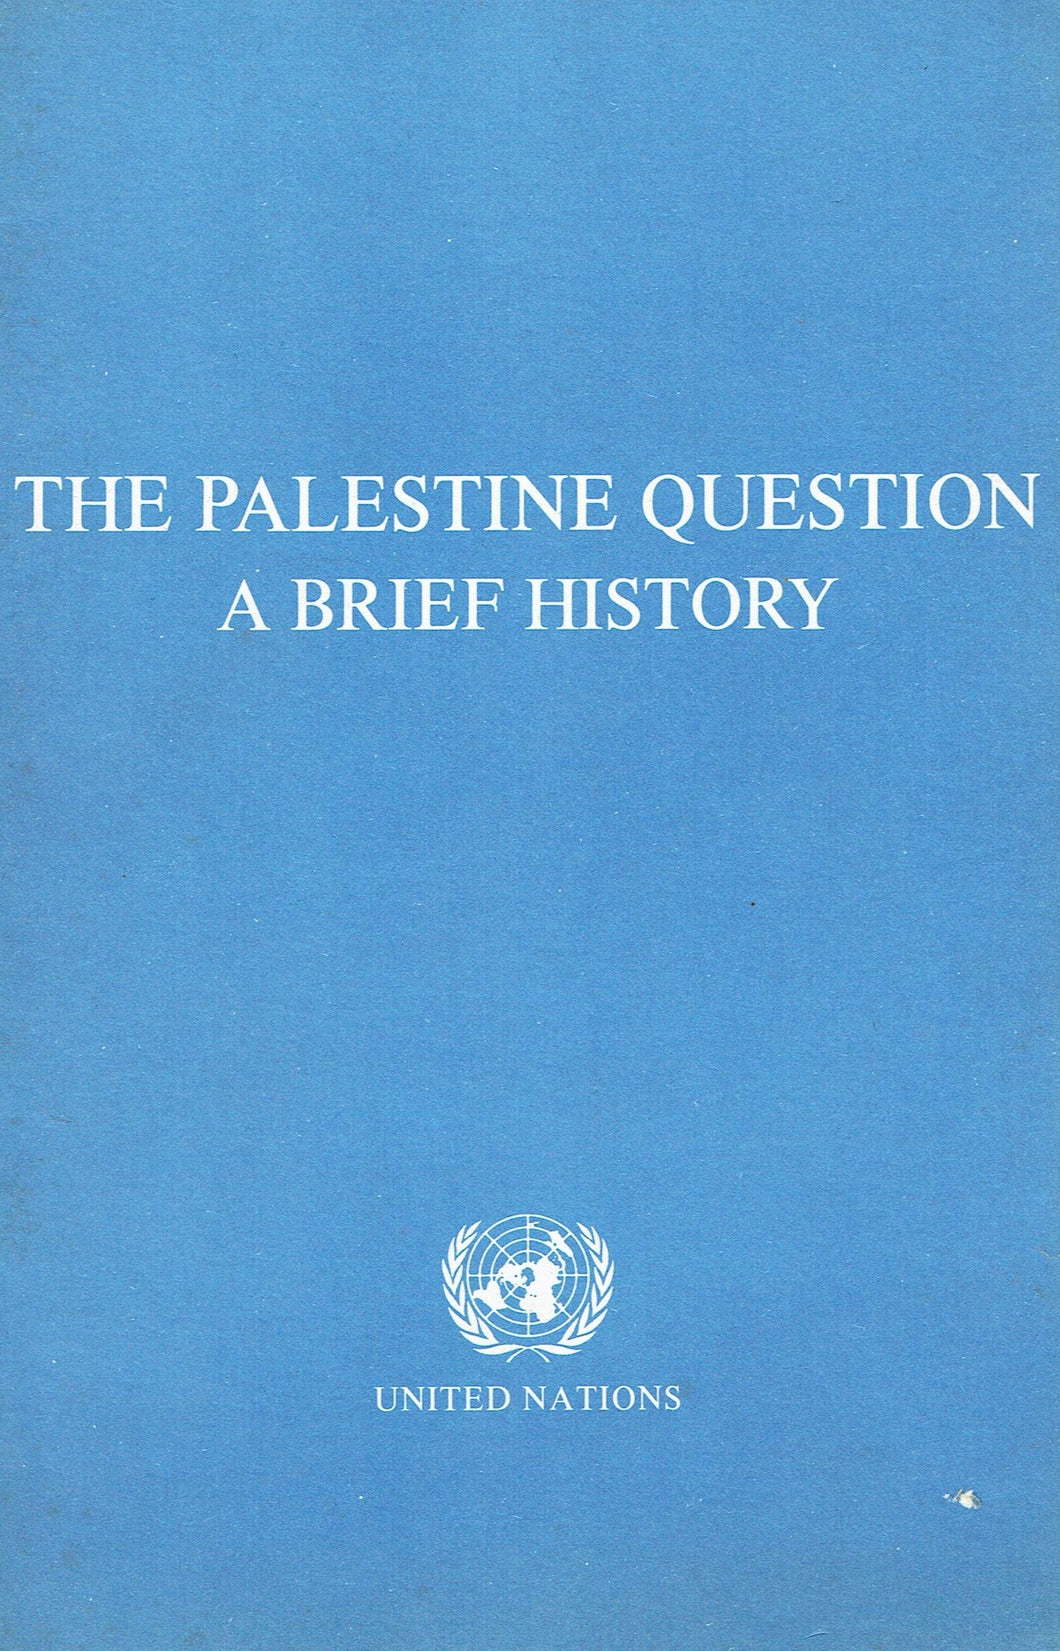 The Palestine Question: A Brief History - Prepared for, and under the guidance of, the Committee on the Exercise of the Inalienable Rights of the Palestinian People